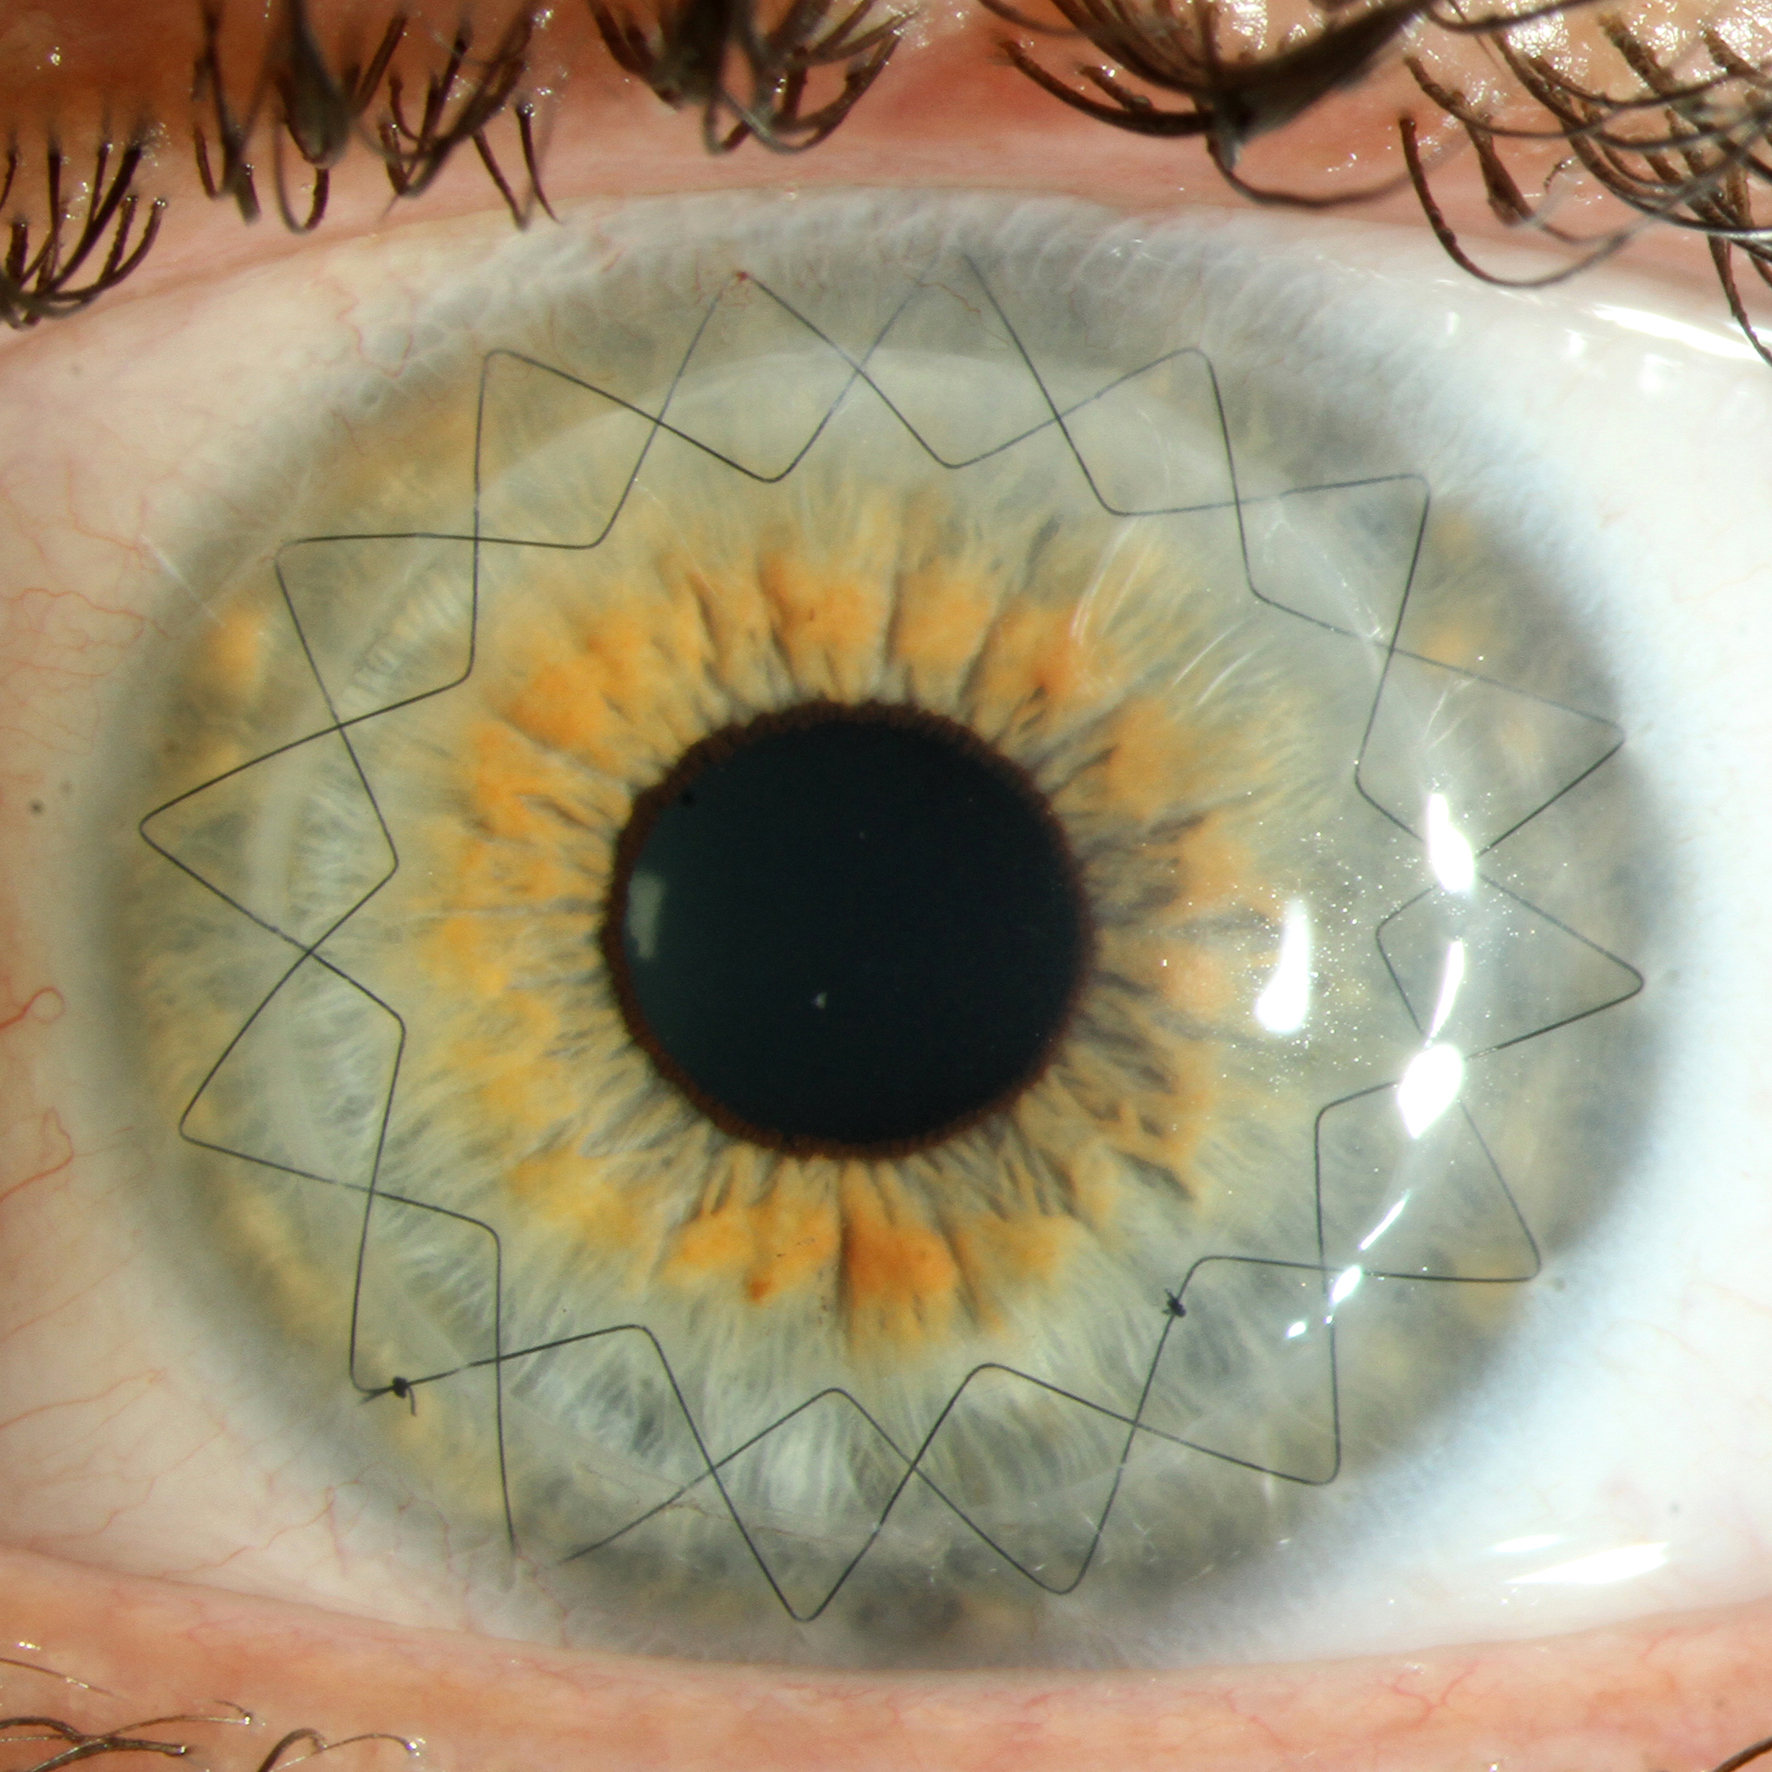 Eye after corneal transplantation with double continuous cross stitch suture